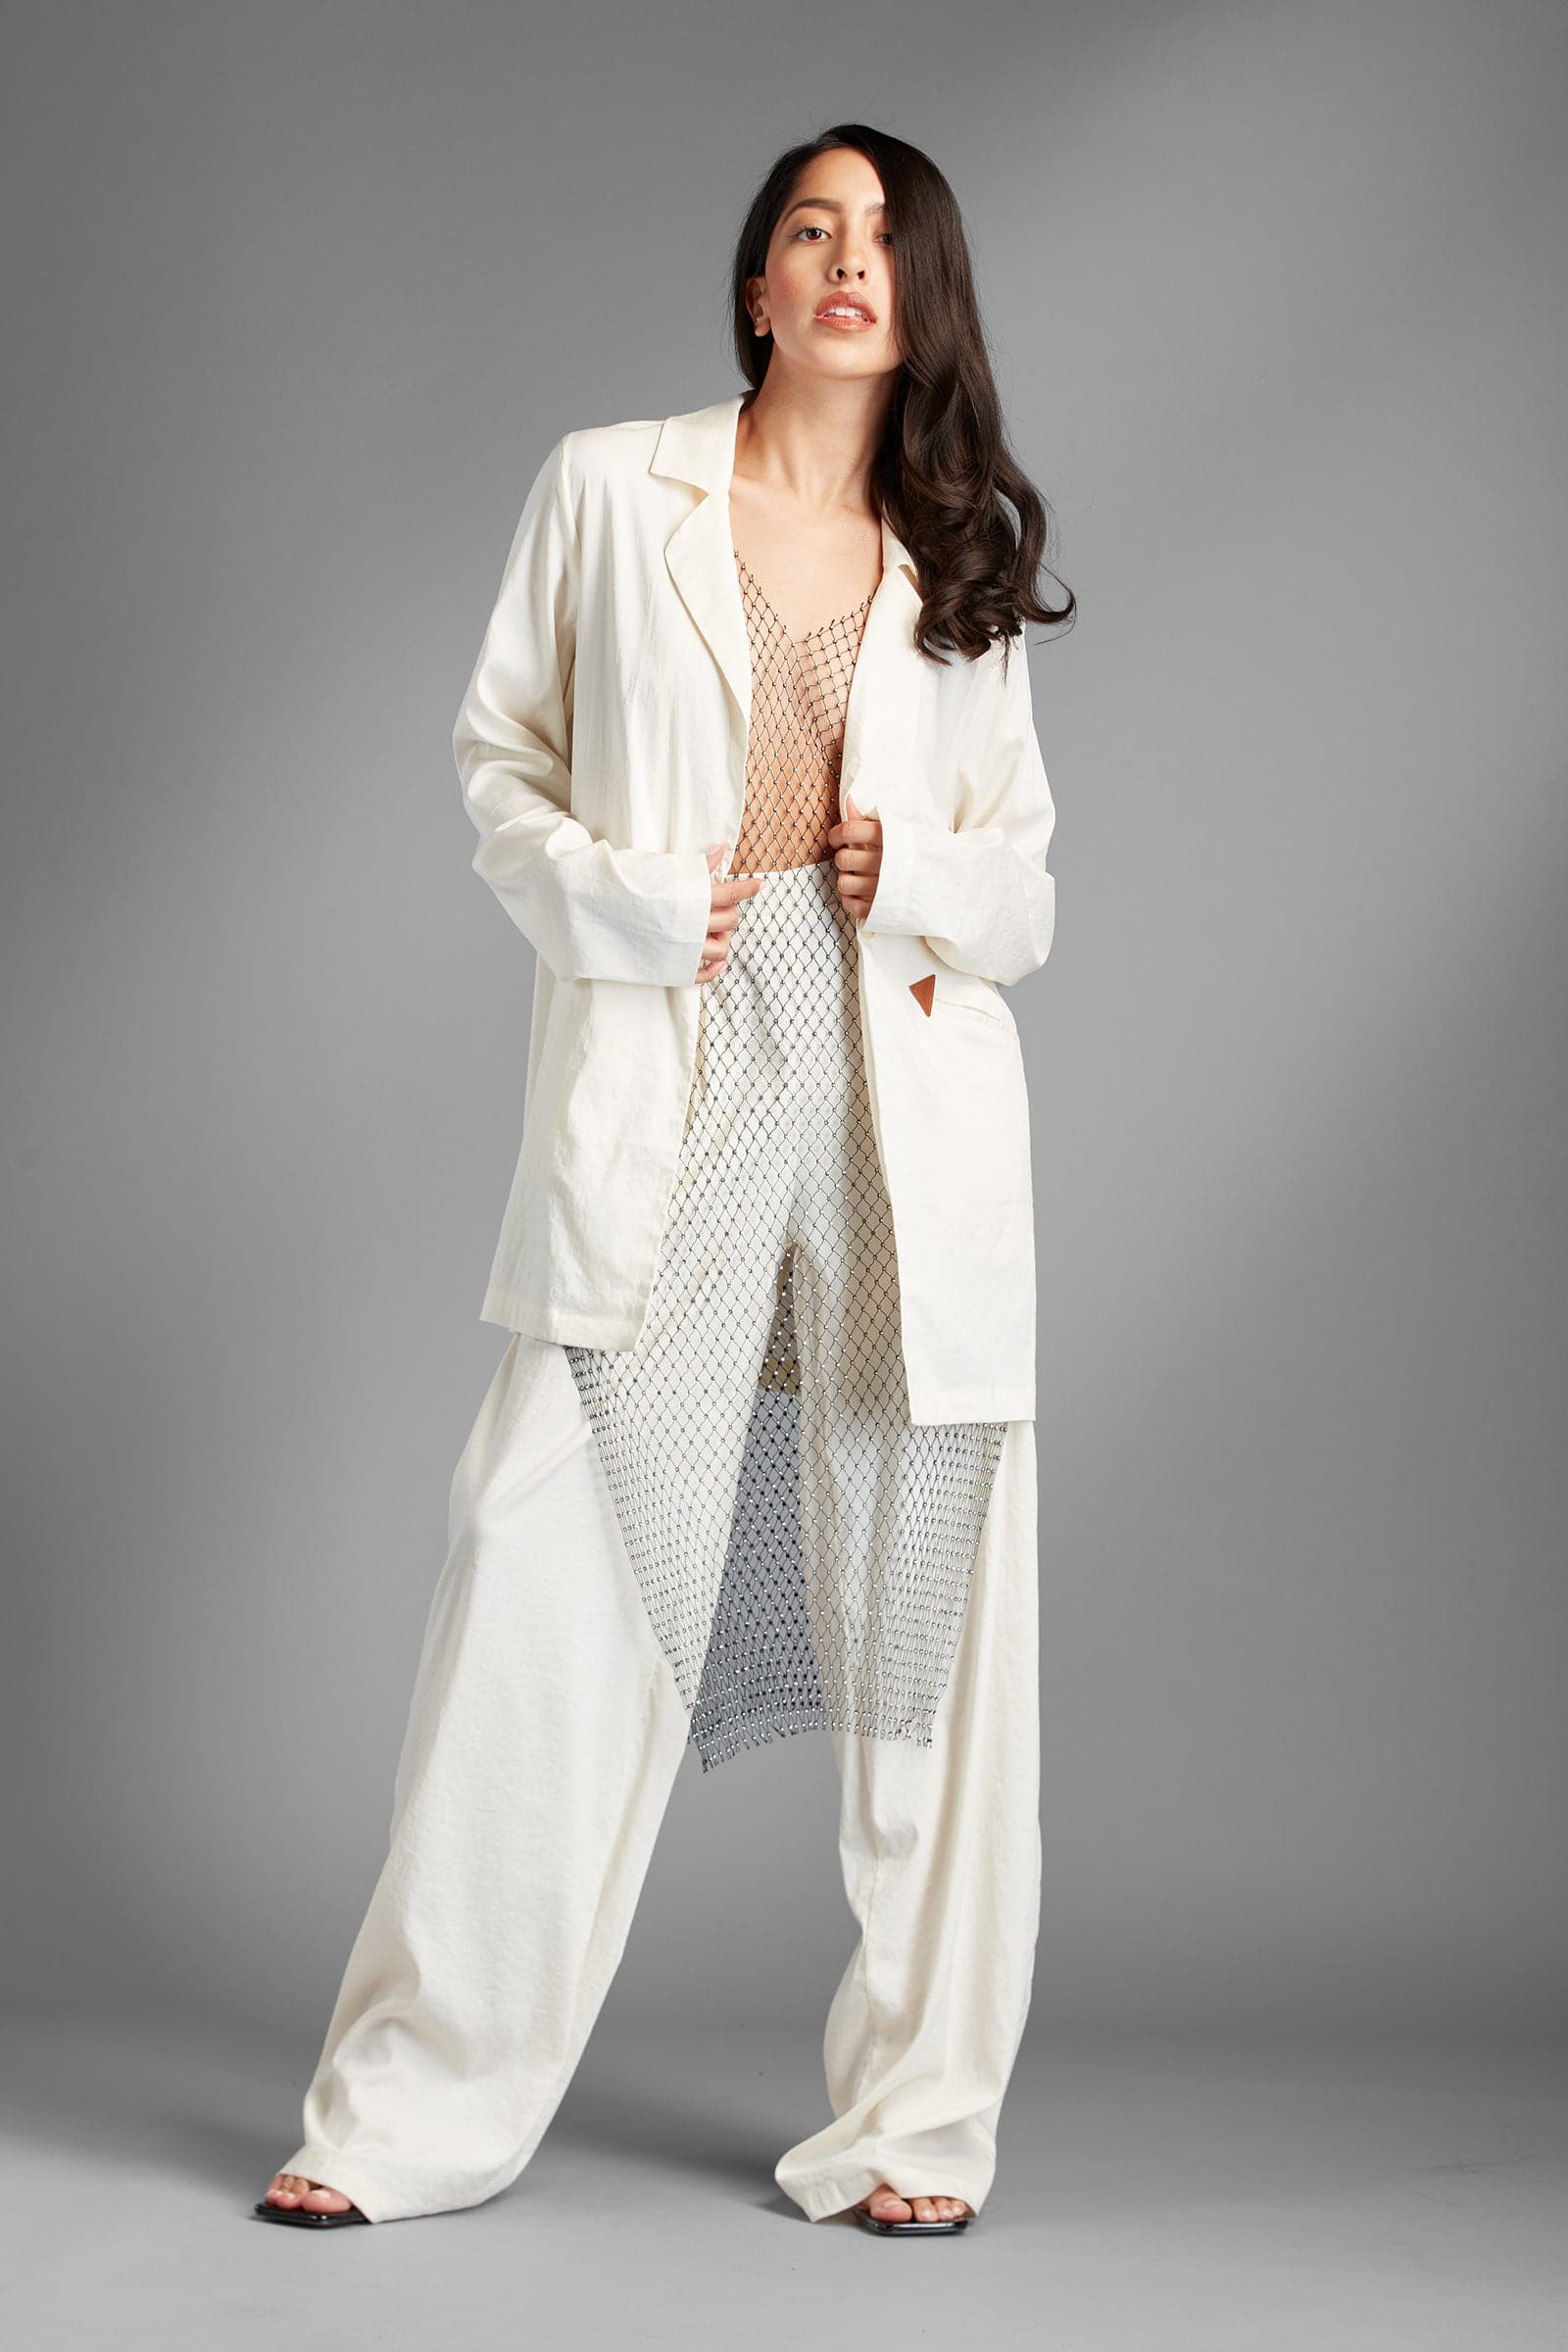 Rock this suit when you want a little seduction with your power.  An ultimate high-end look for any season - you can dress it down or dress it up with your favorite accessories to create a unique style all your own. This chic set features a single-button oversized blazer and pants with side pockets and an elastic waistband at the back. It is made of a soft polyblend material that feels luxurious, breathable, and lightweight. Avah Couture